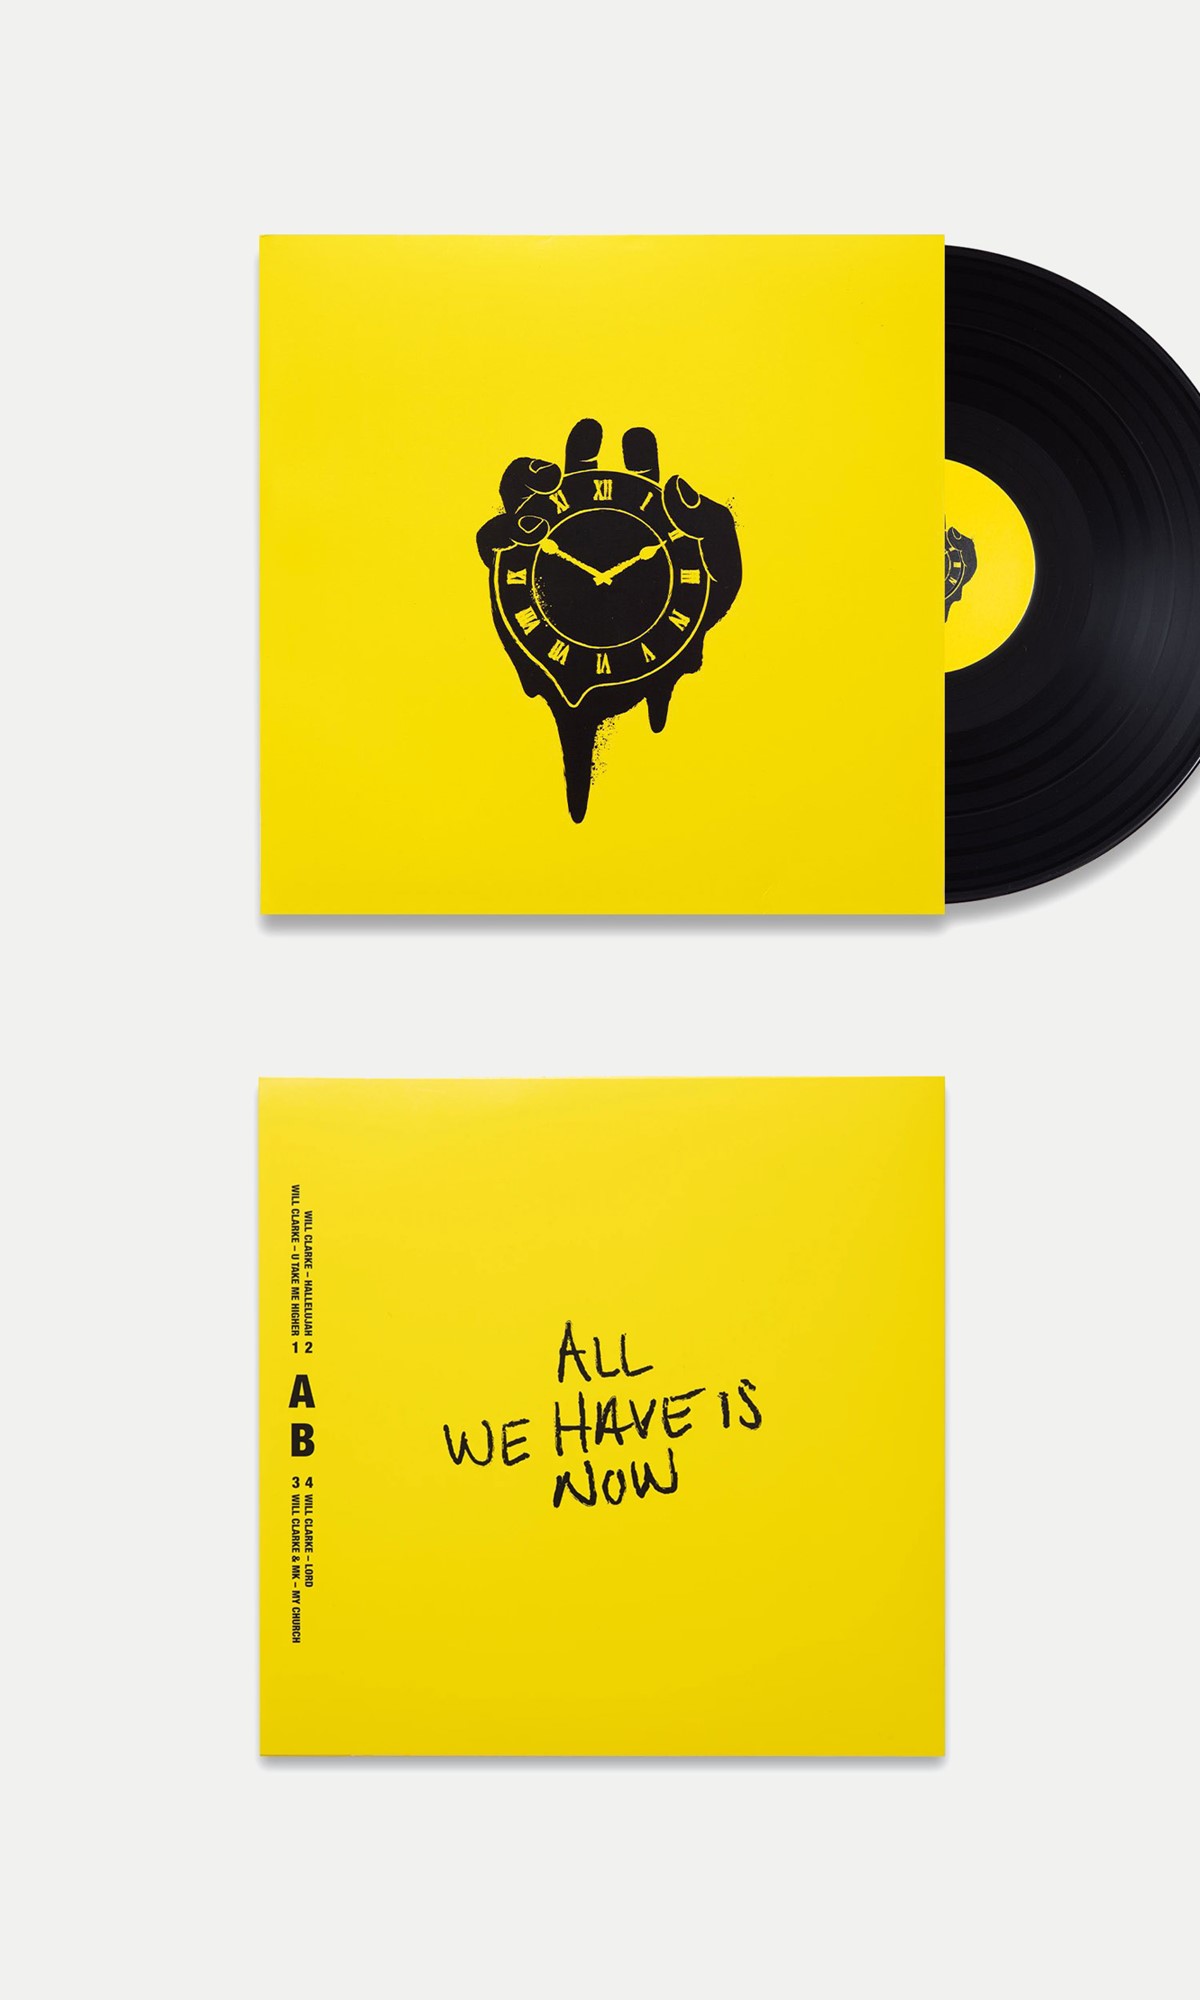 All We Have is Now. Vinyl sleeve design. Brand identity design by Superfried.